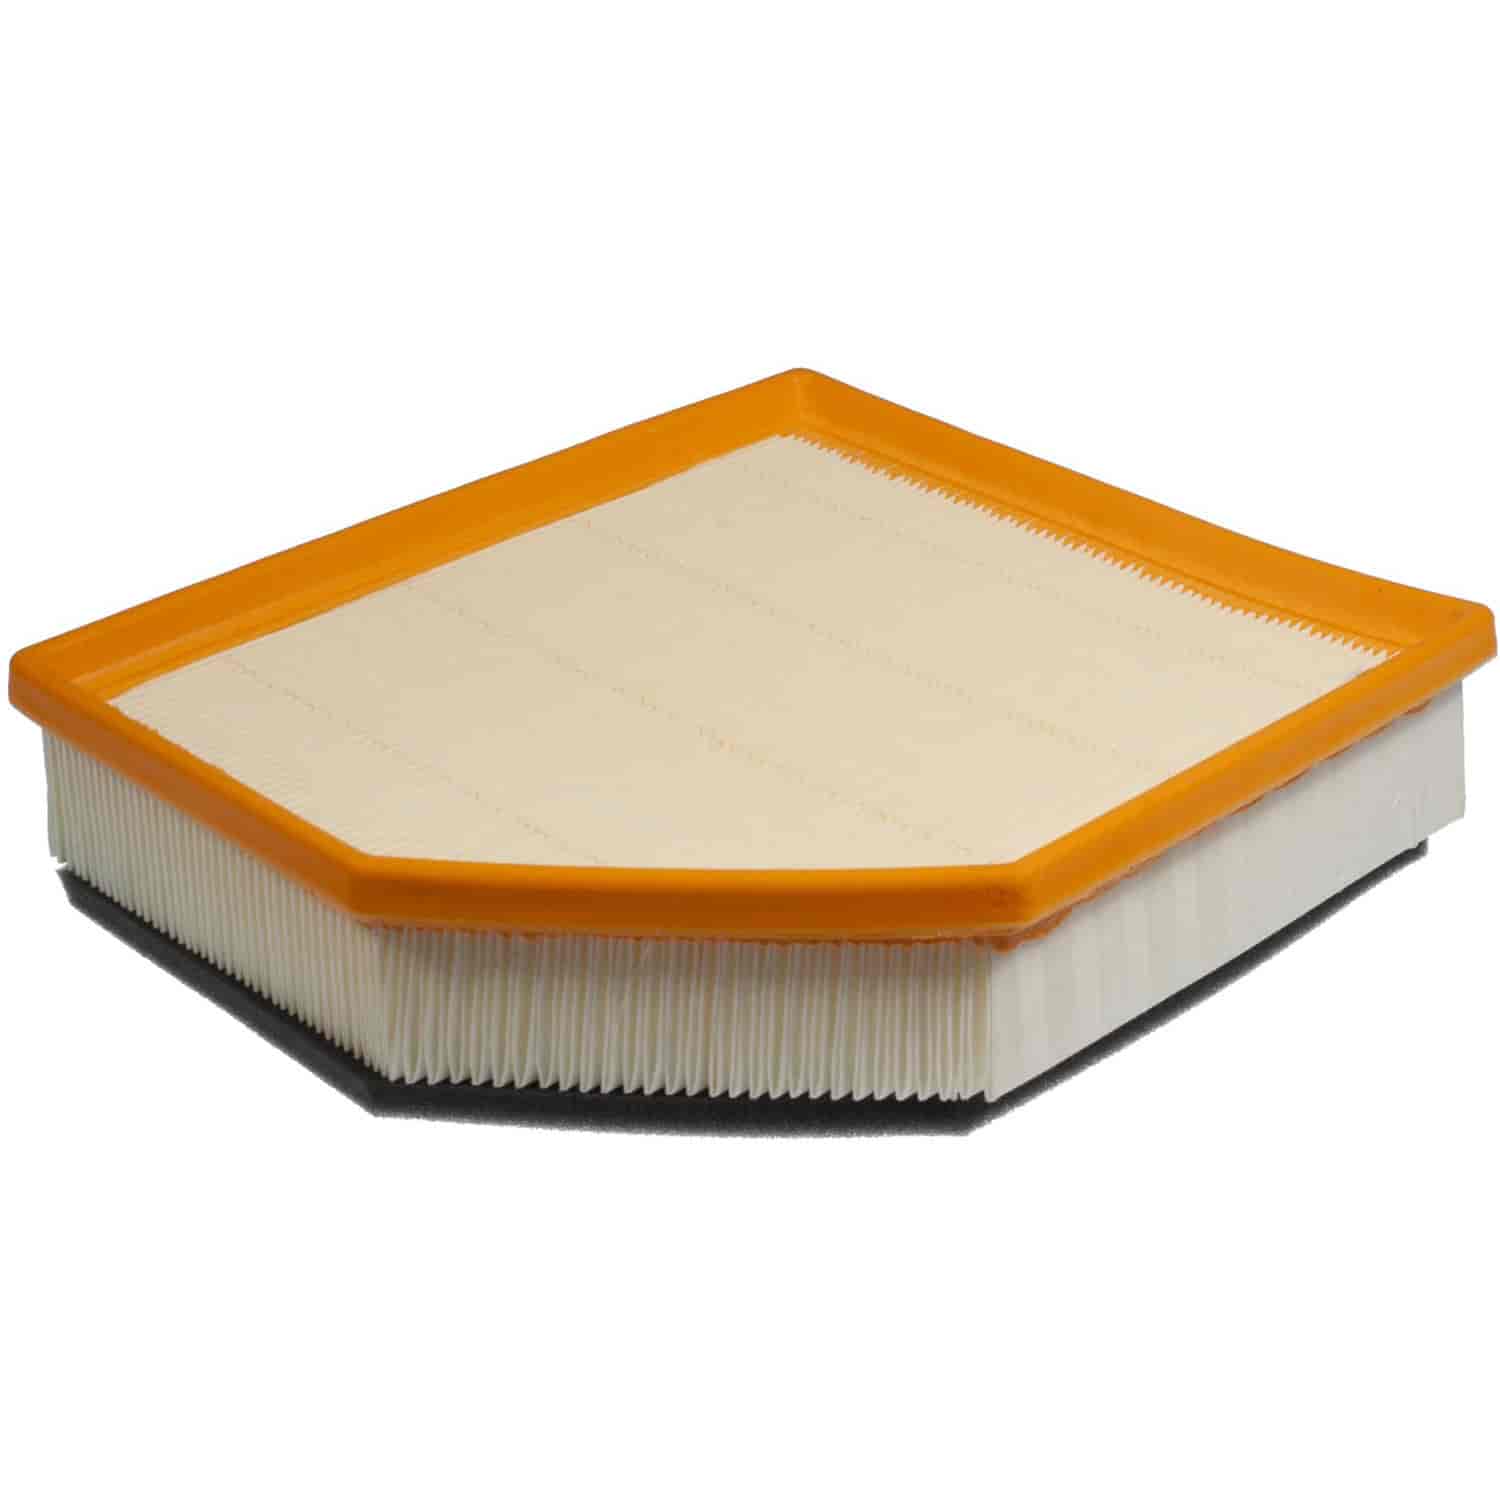 Mahle Air Filter VOLVO S80 V70 XC60 3.0L AND 3.2L 2007->